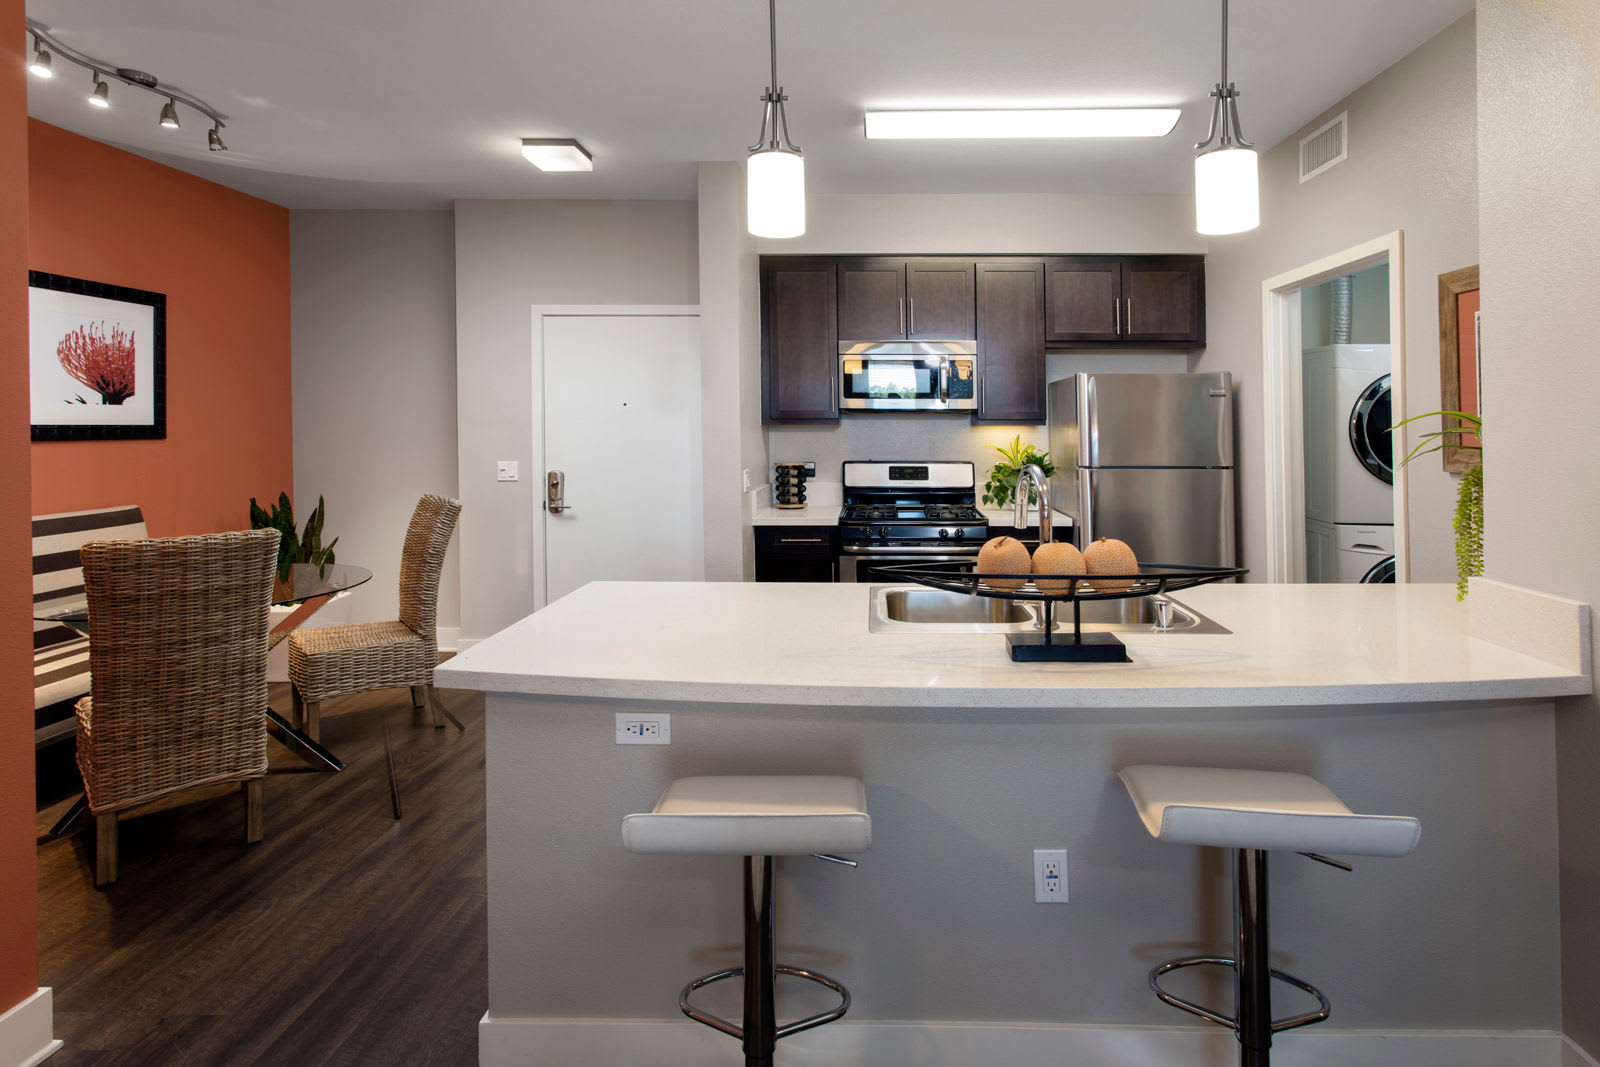 Kitchen with bar at The Boulevard Apartment Homes in Woodland Hills, California